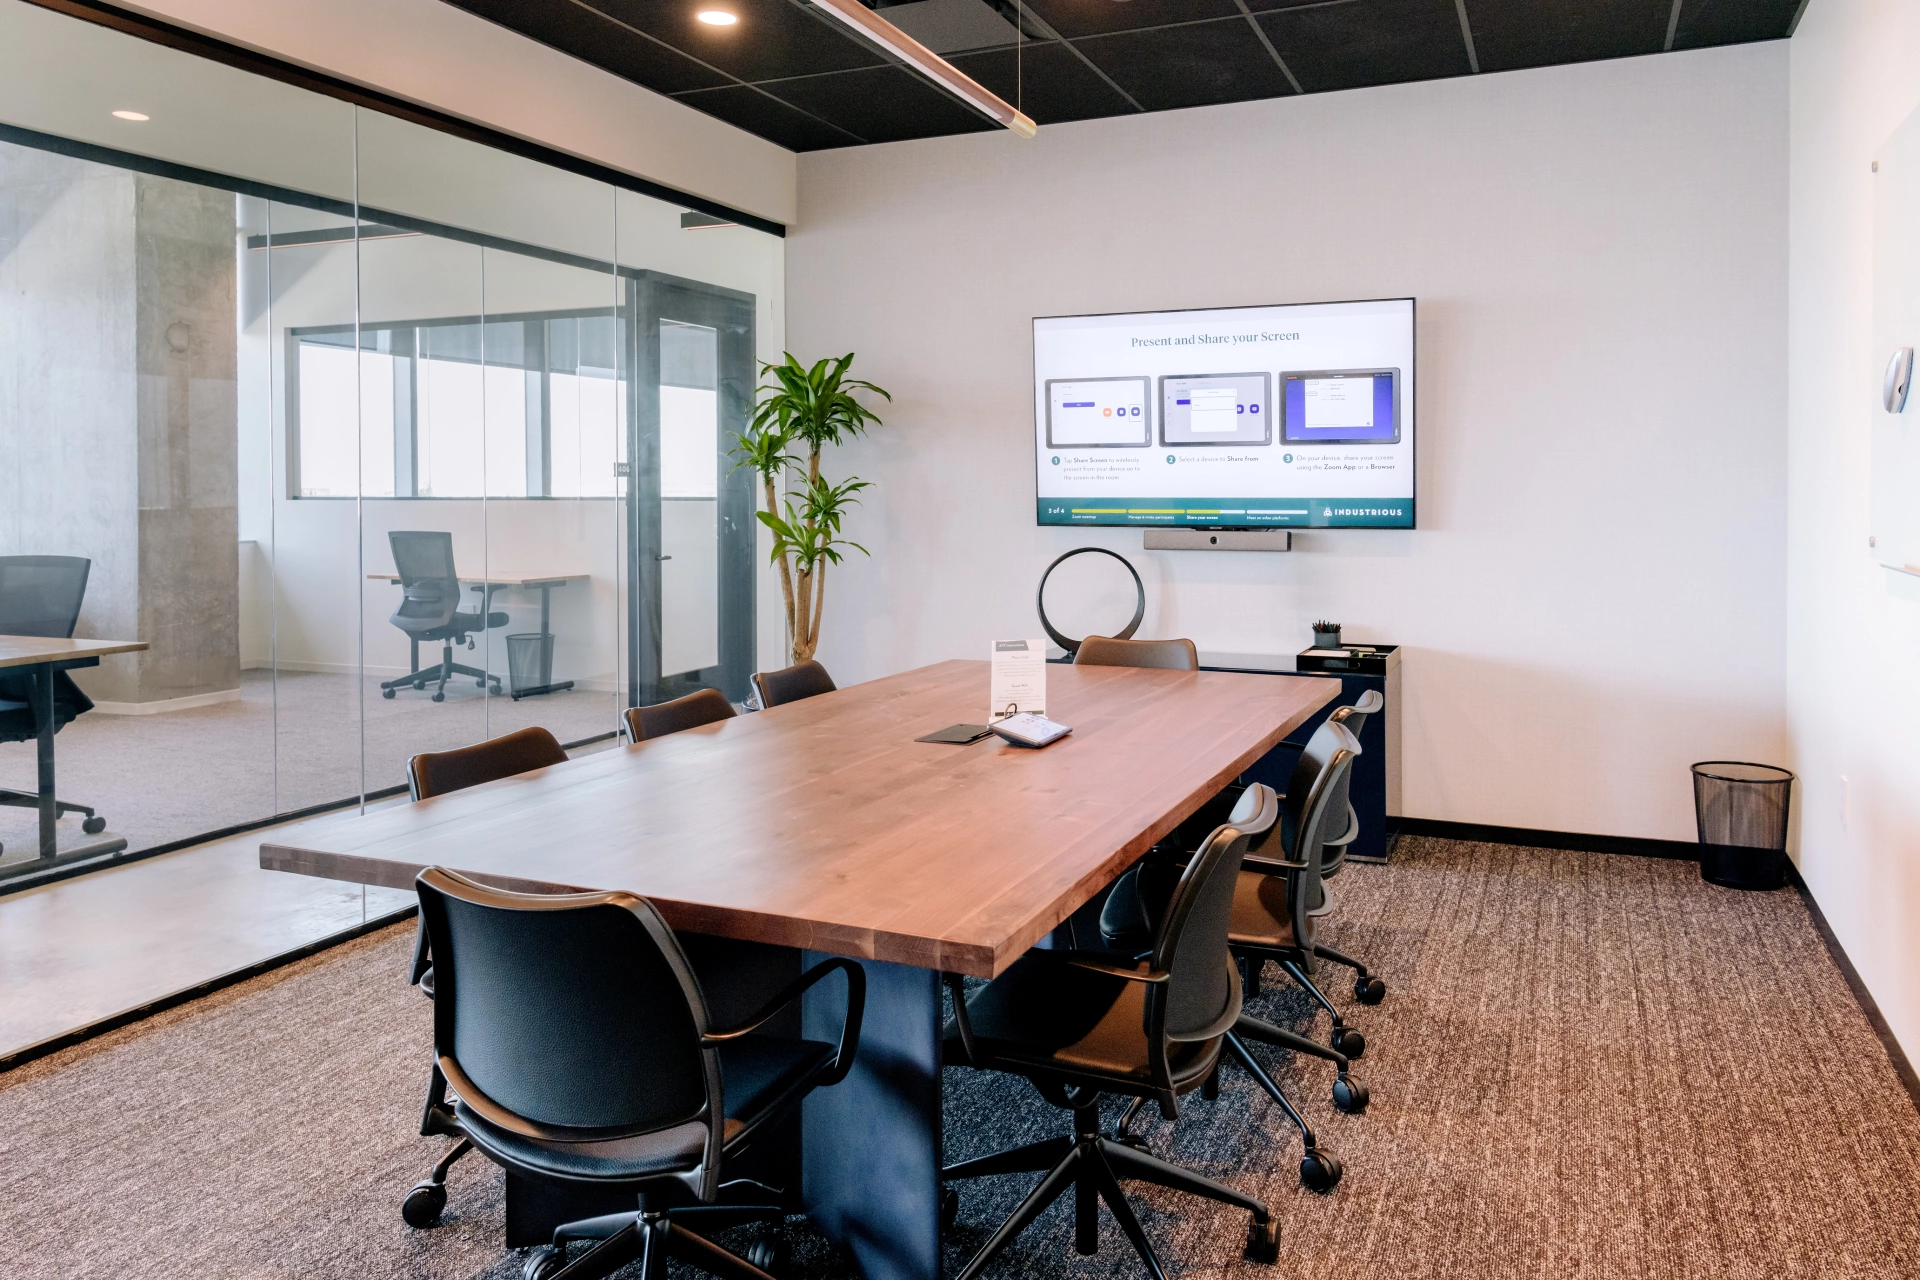 An office meeting room equipped with a large screen TV.